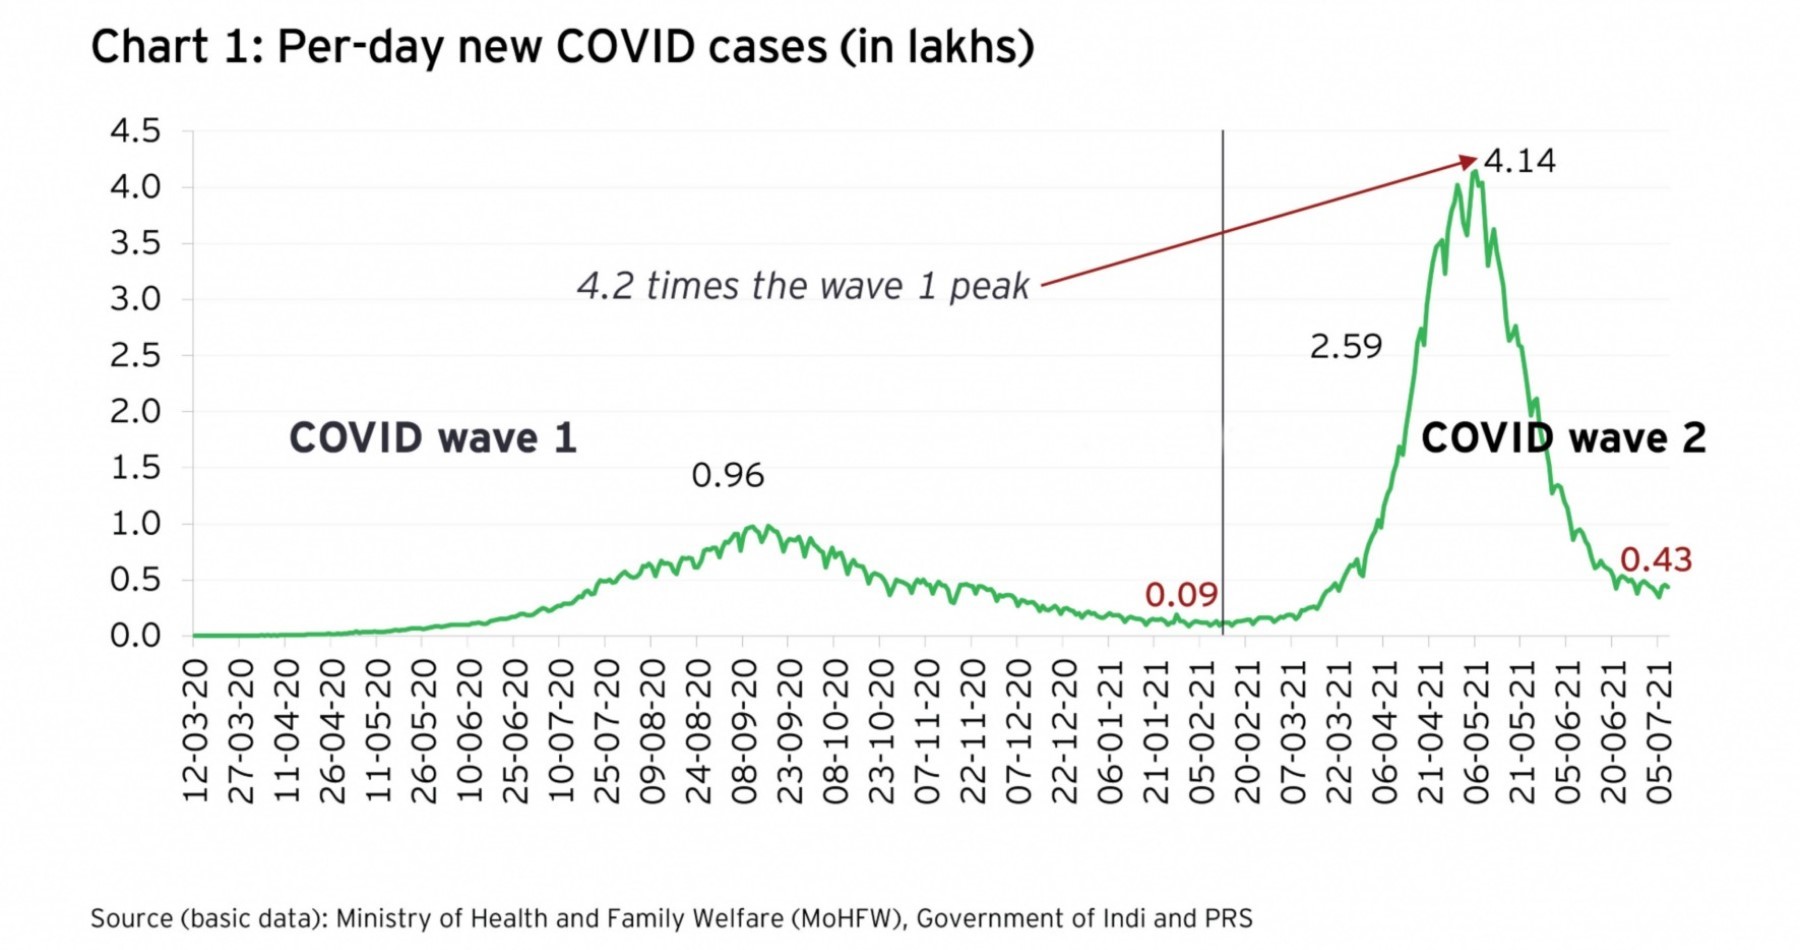 Inter-state distribution of COVID cases (cumulated up to April 2021)